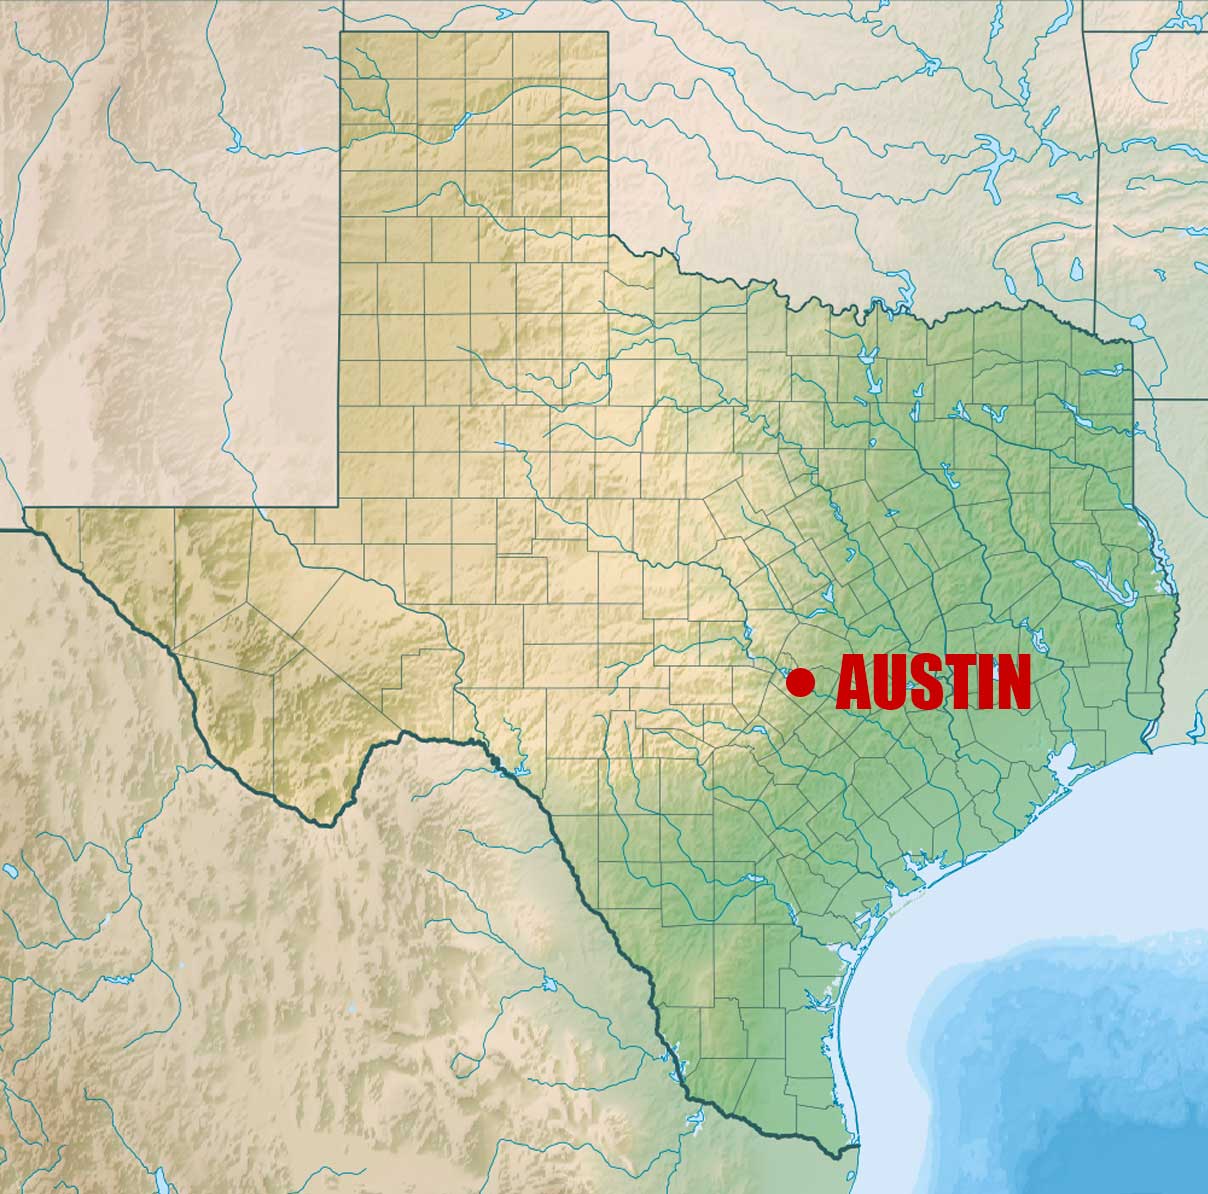 Location of Austin on US Texas Map